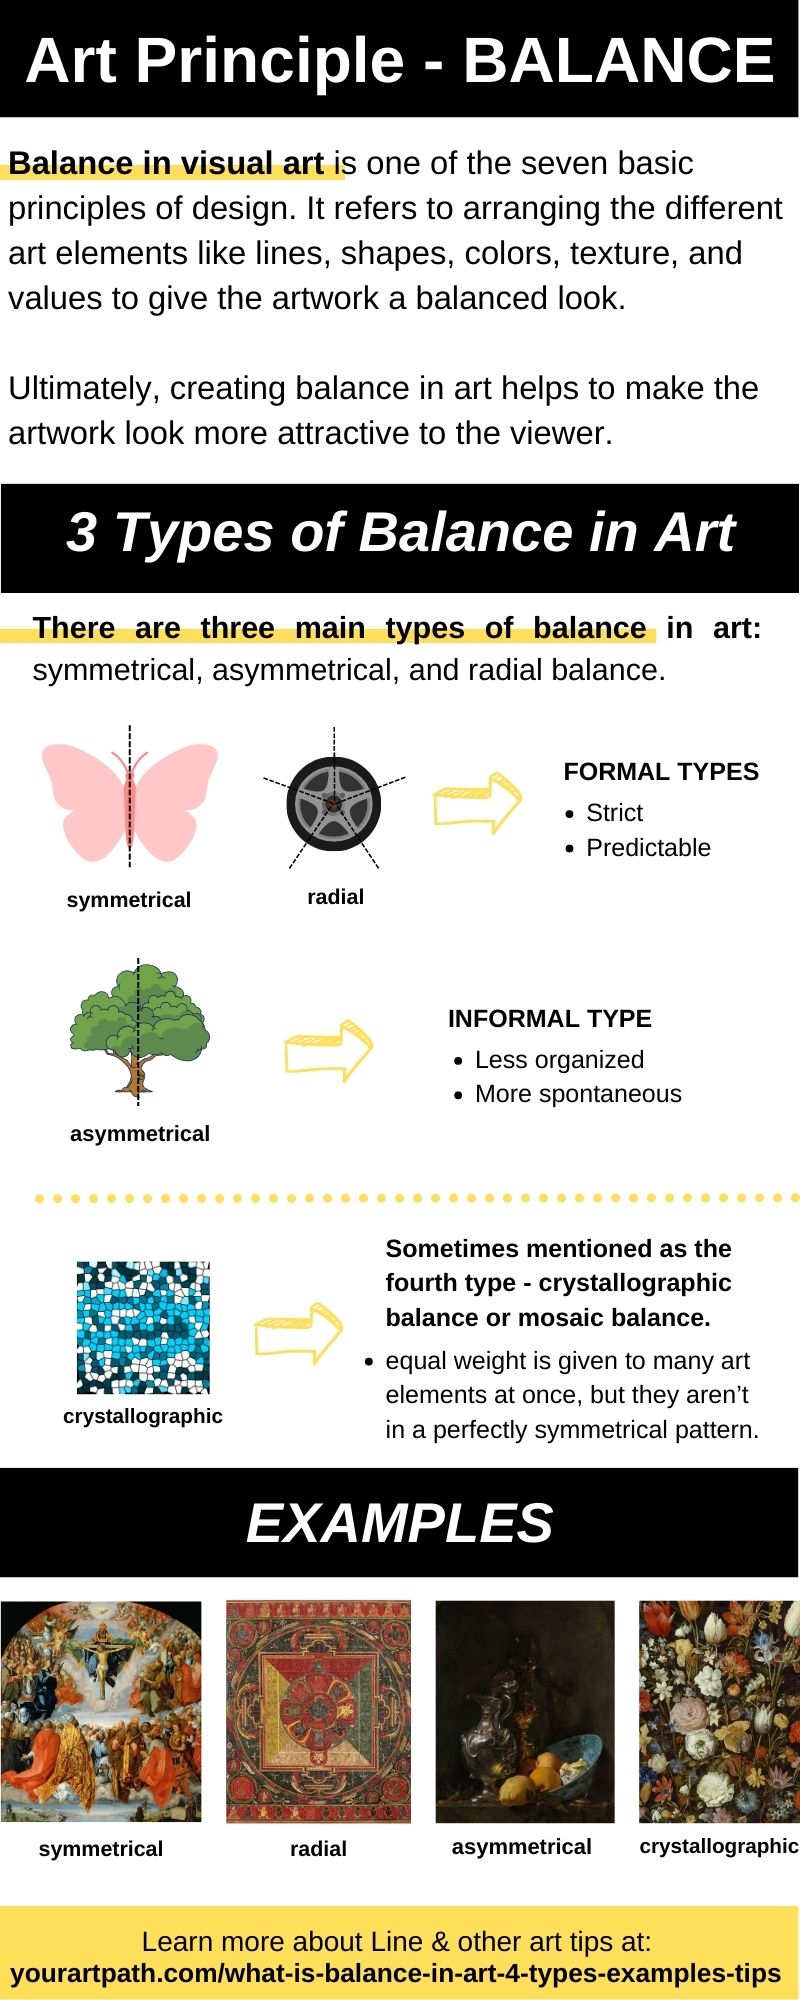 What Is Balance In Graphic Design? The Balance Principle Of Design